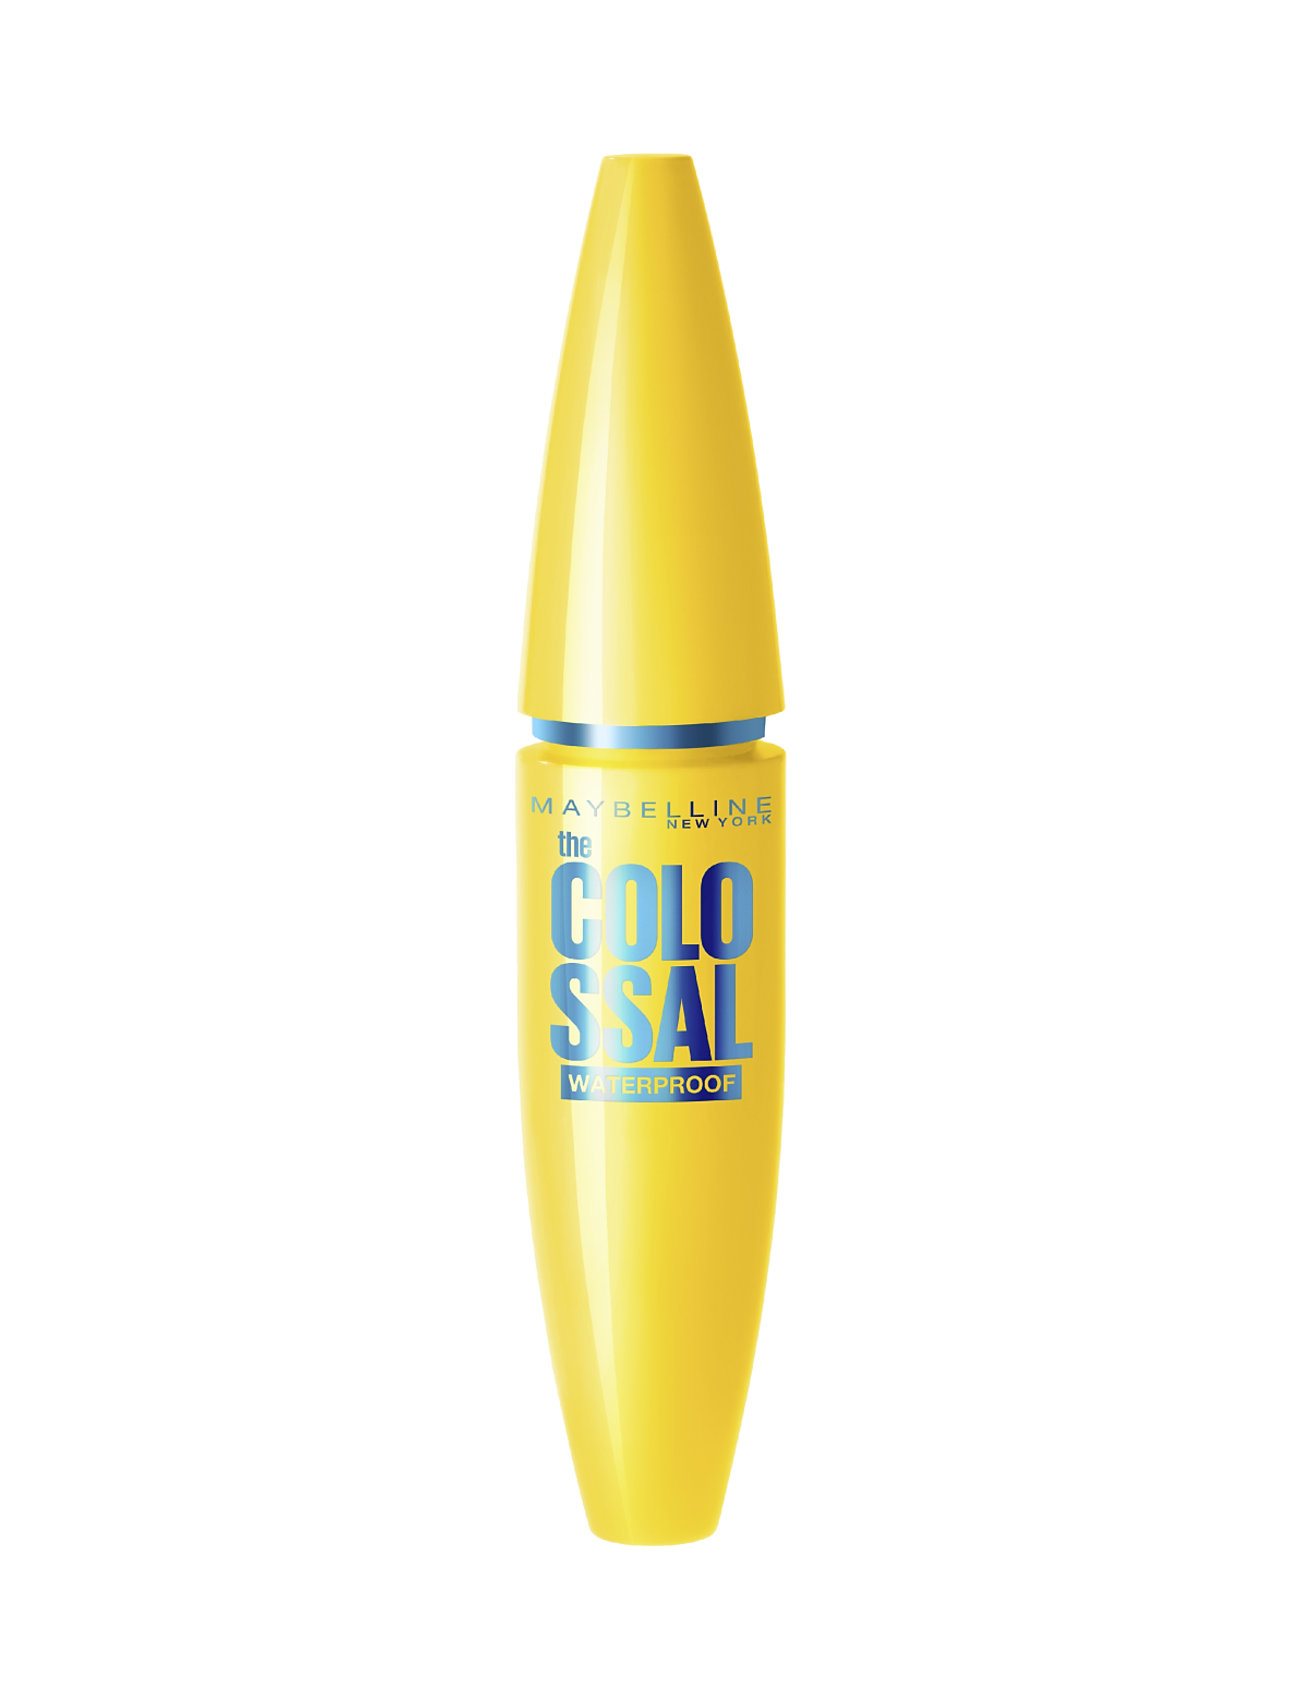 Maybelline New York The Colossal Waterproof Mascara Black Mascara Smink Black Maybelline